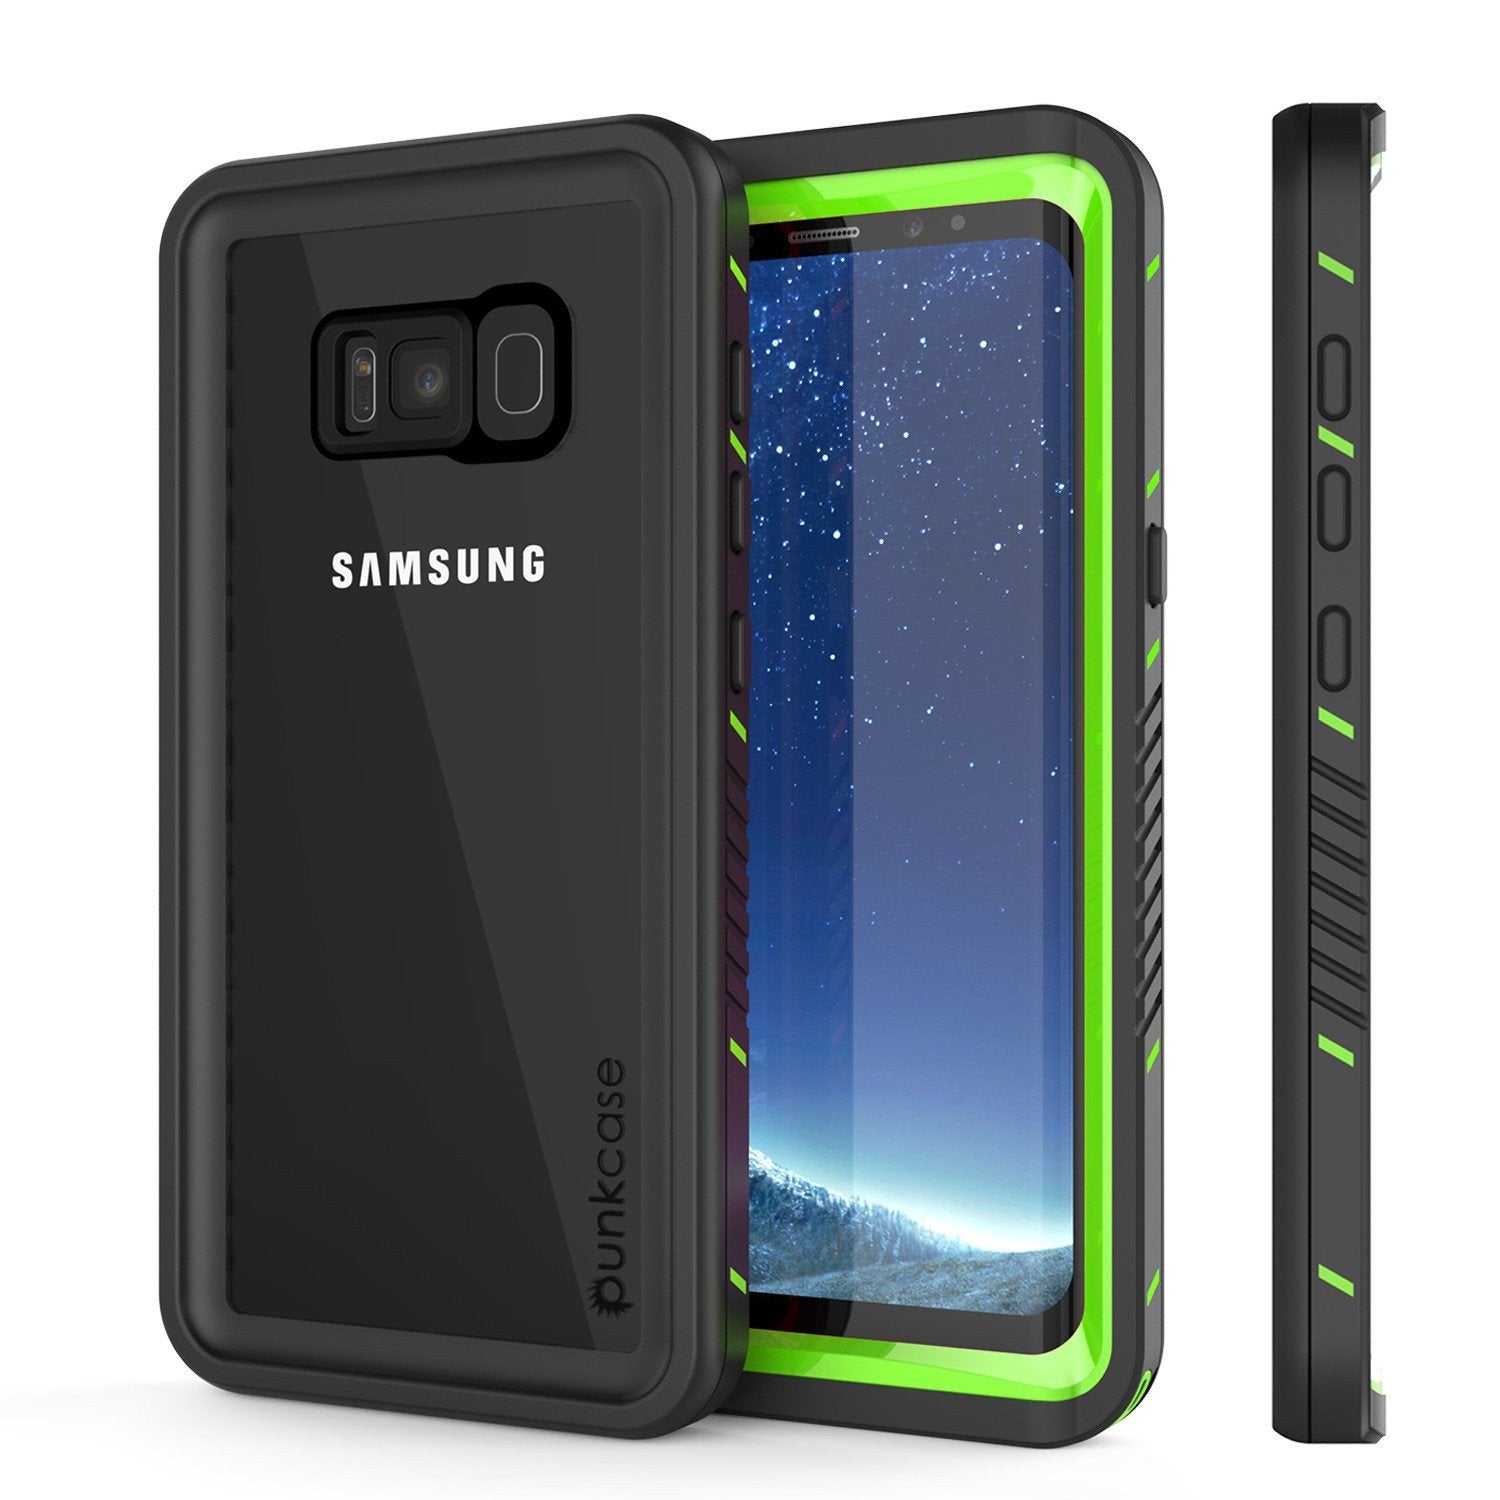 Galaxy S8 PLUS Waterproof Case, Punkcase [Extreme Series] [Slim Fit] [IP68 Certified] [Shockproof] [Snowproof] [Dirproof] Armor Cover W/ Built In Screen Protector for Samsung Galaxy S8+ [Green]